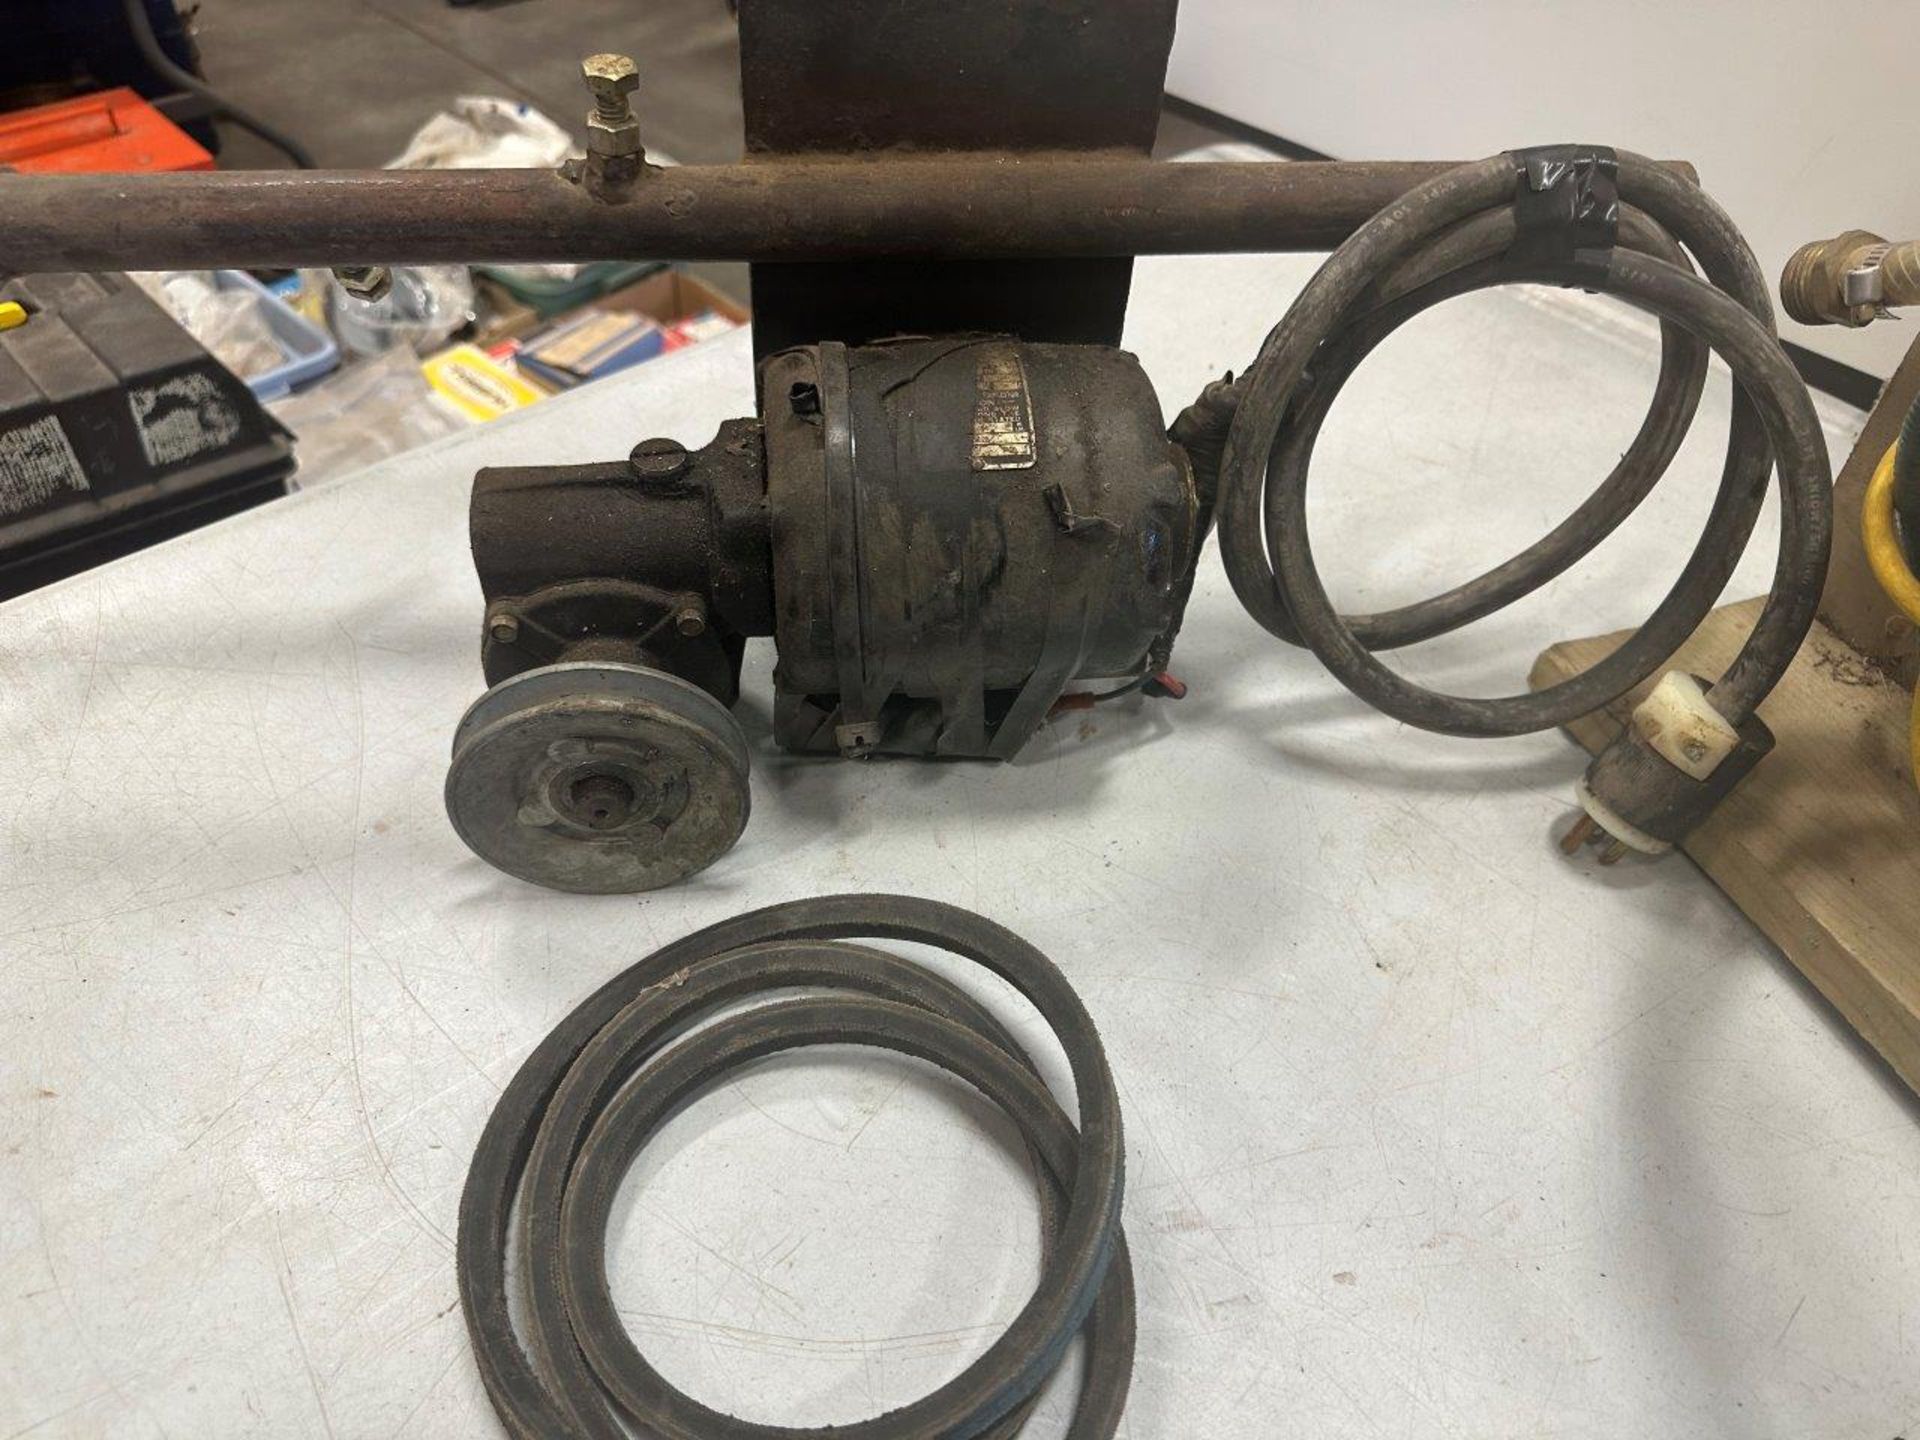 MILTON ROY CO. INLINE WATER PUMP 115V/1/50HP & 120V ELEC MOTOR W/ PULLY - Image 2 of 3